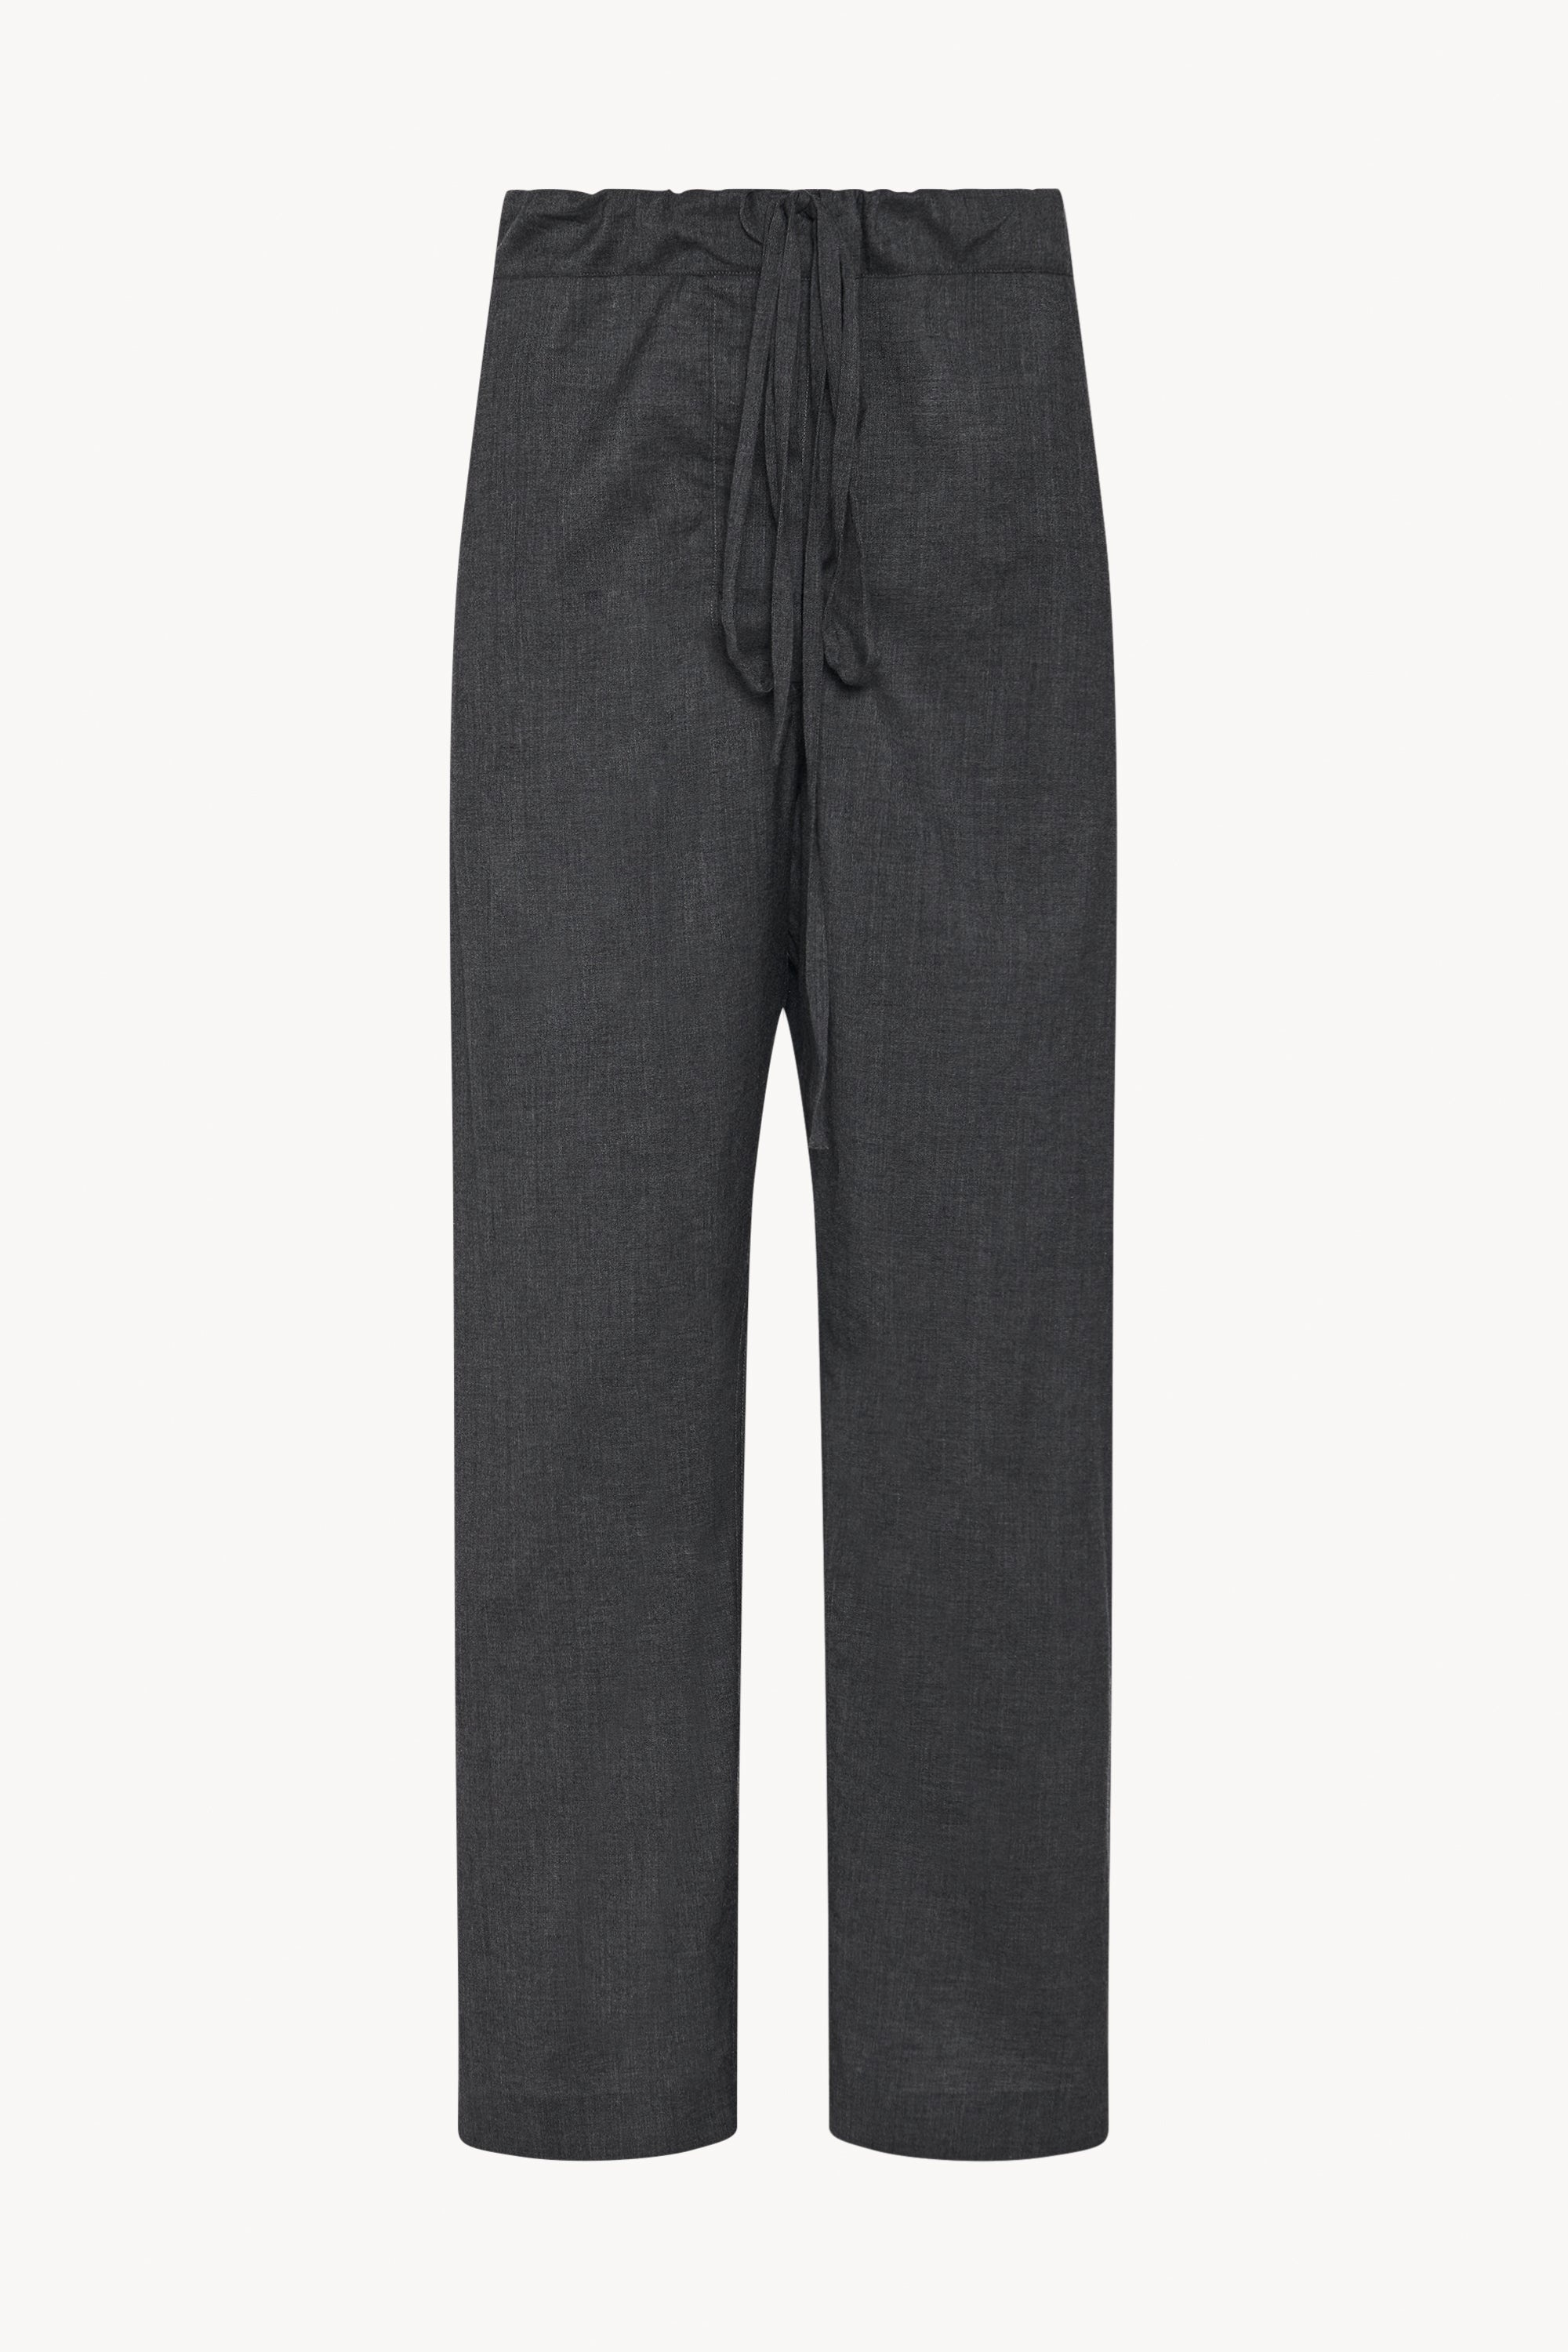 Argent Pant in Silk and Cotton - 1